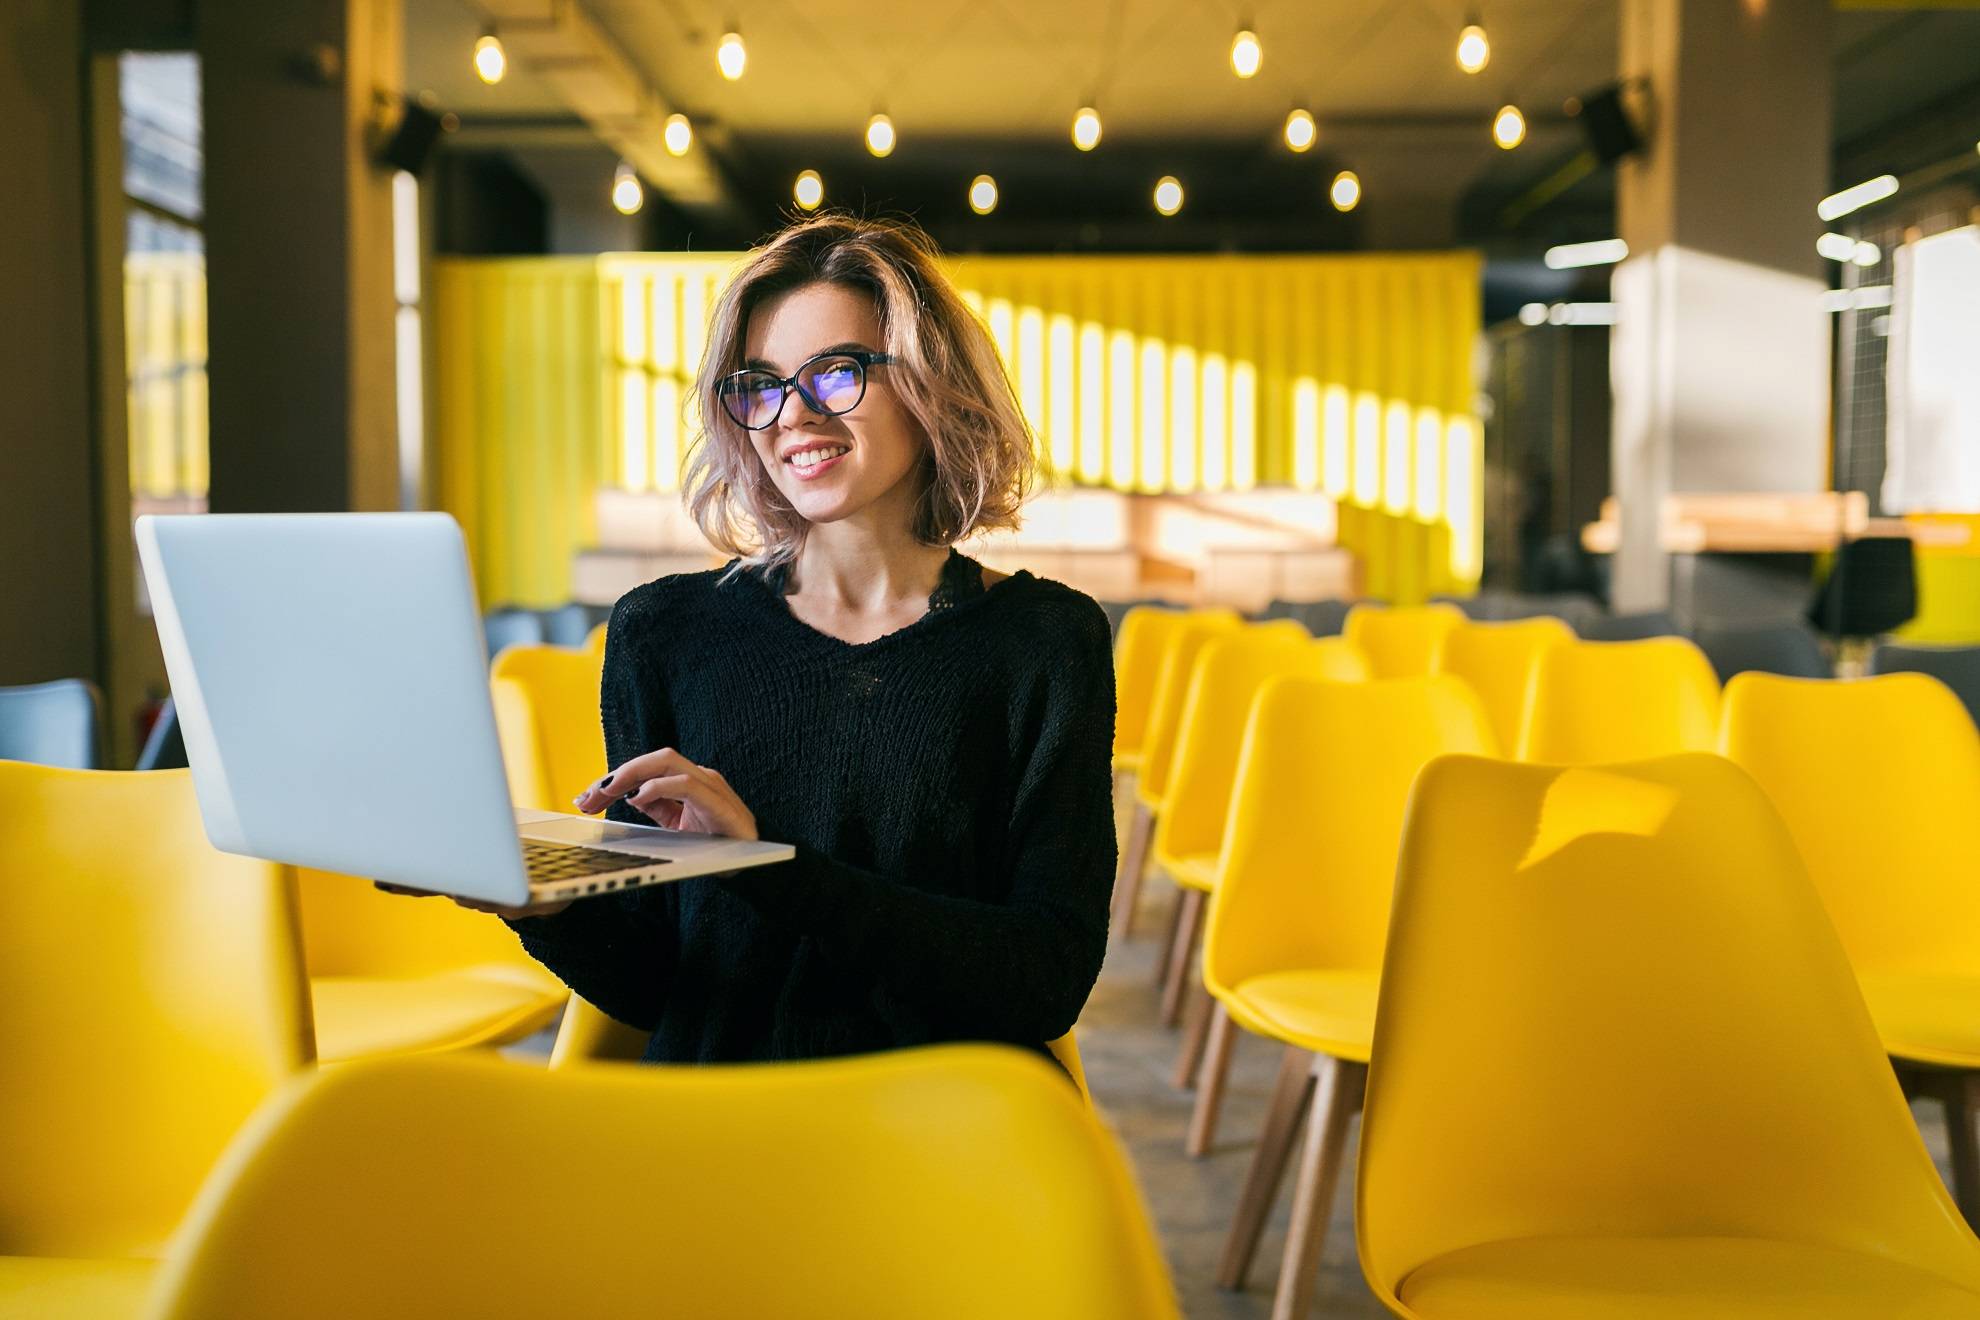 portrait of young attractive woman sitting in lecture hall working on laptop wearing glasses, student learning in classroom with many yellow chairs